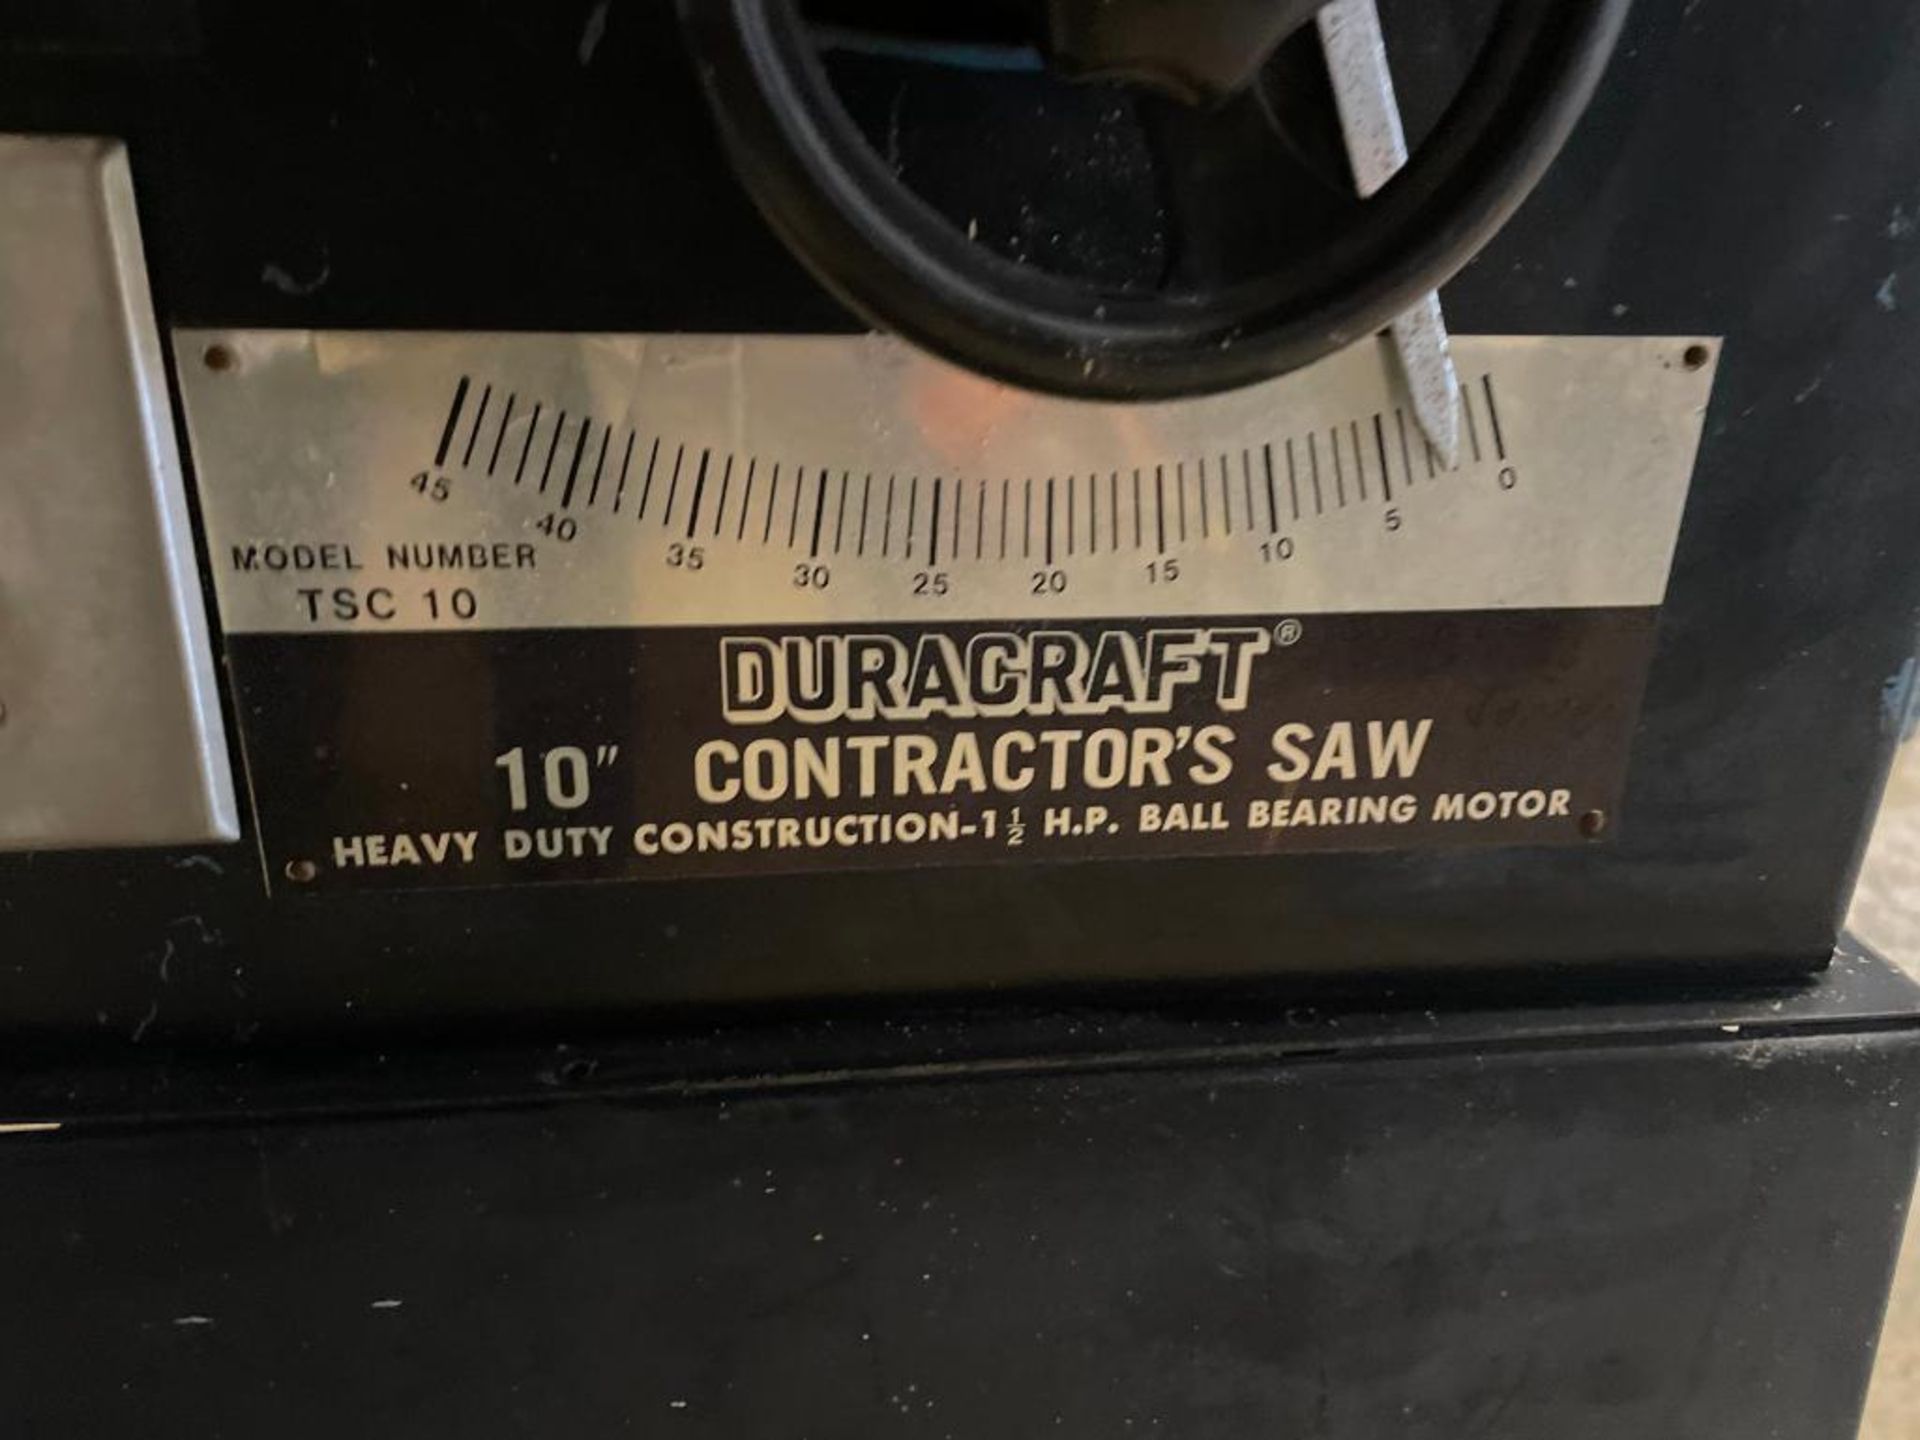 Duracraft 10" Contractors Saw, Model TSC 10, Serial #3975. Located in Hazelwood, MO - Image 6 of 8